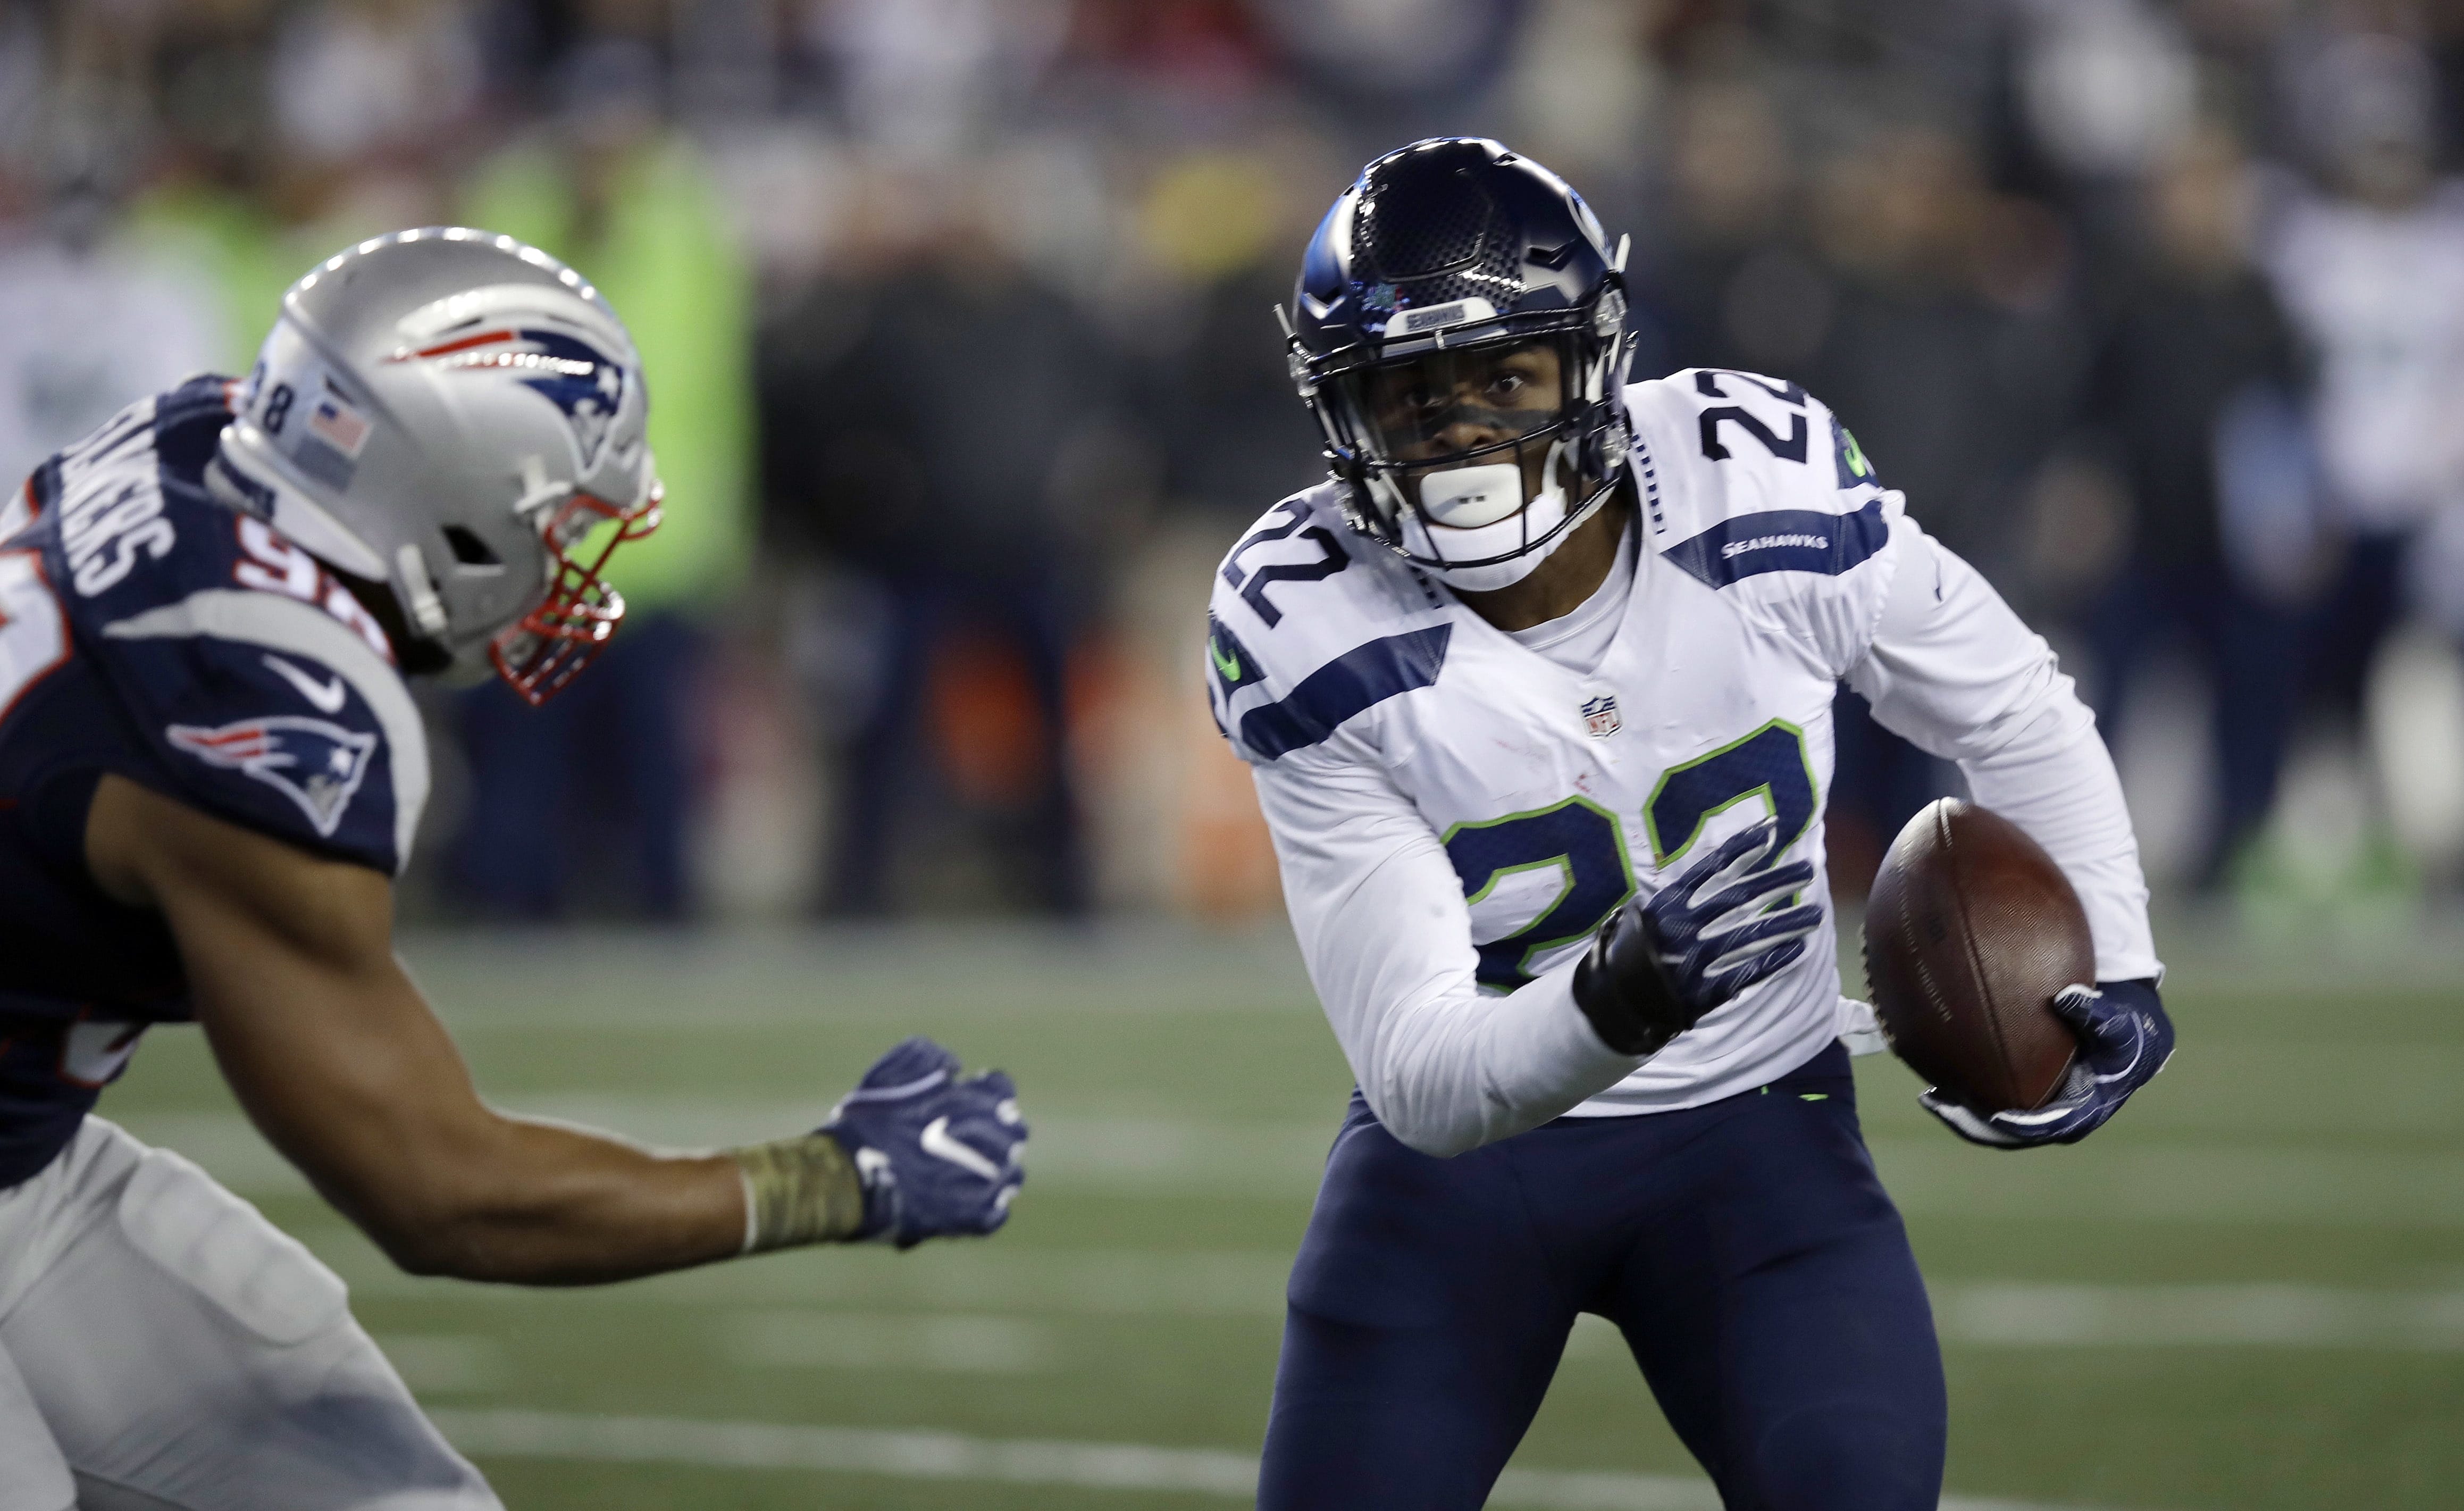 Prosise hoping to stay healthy, produce big for Seahawks - The